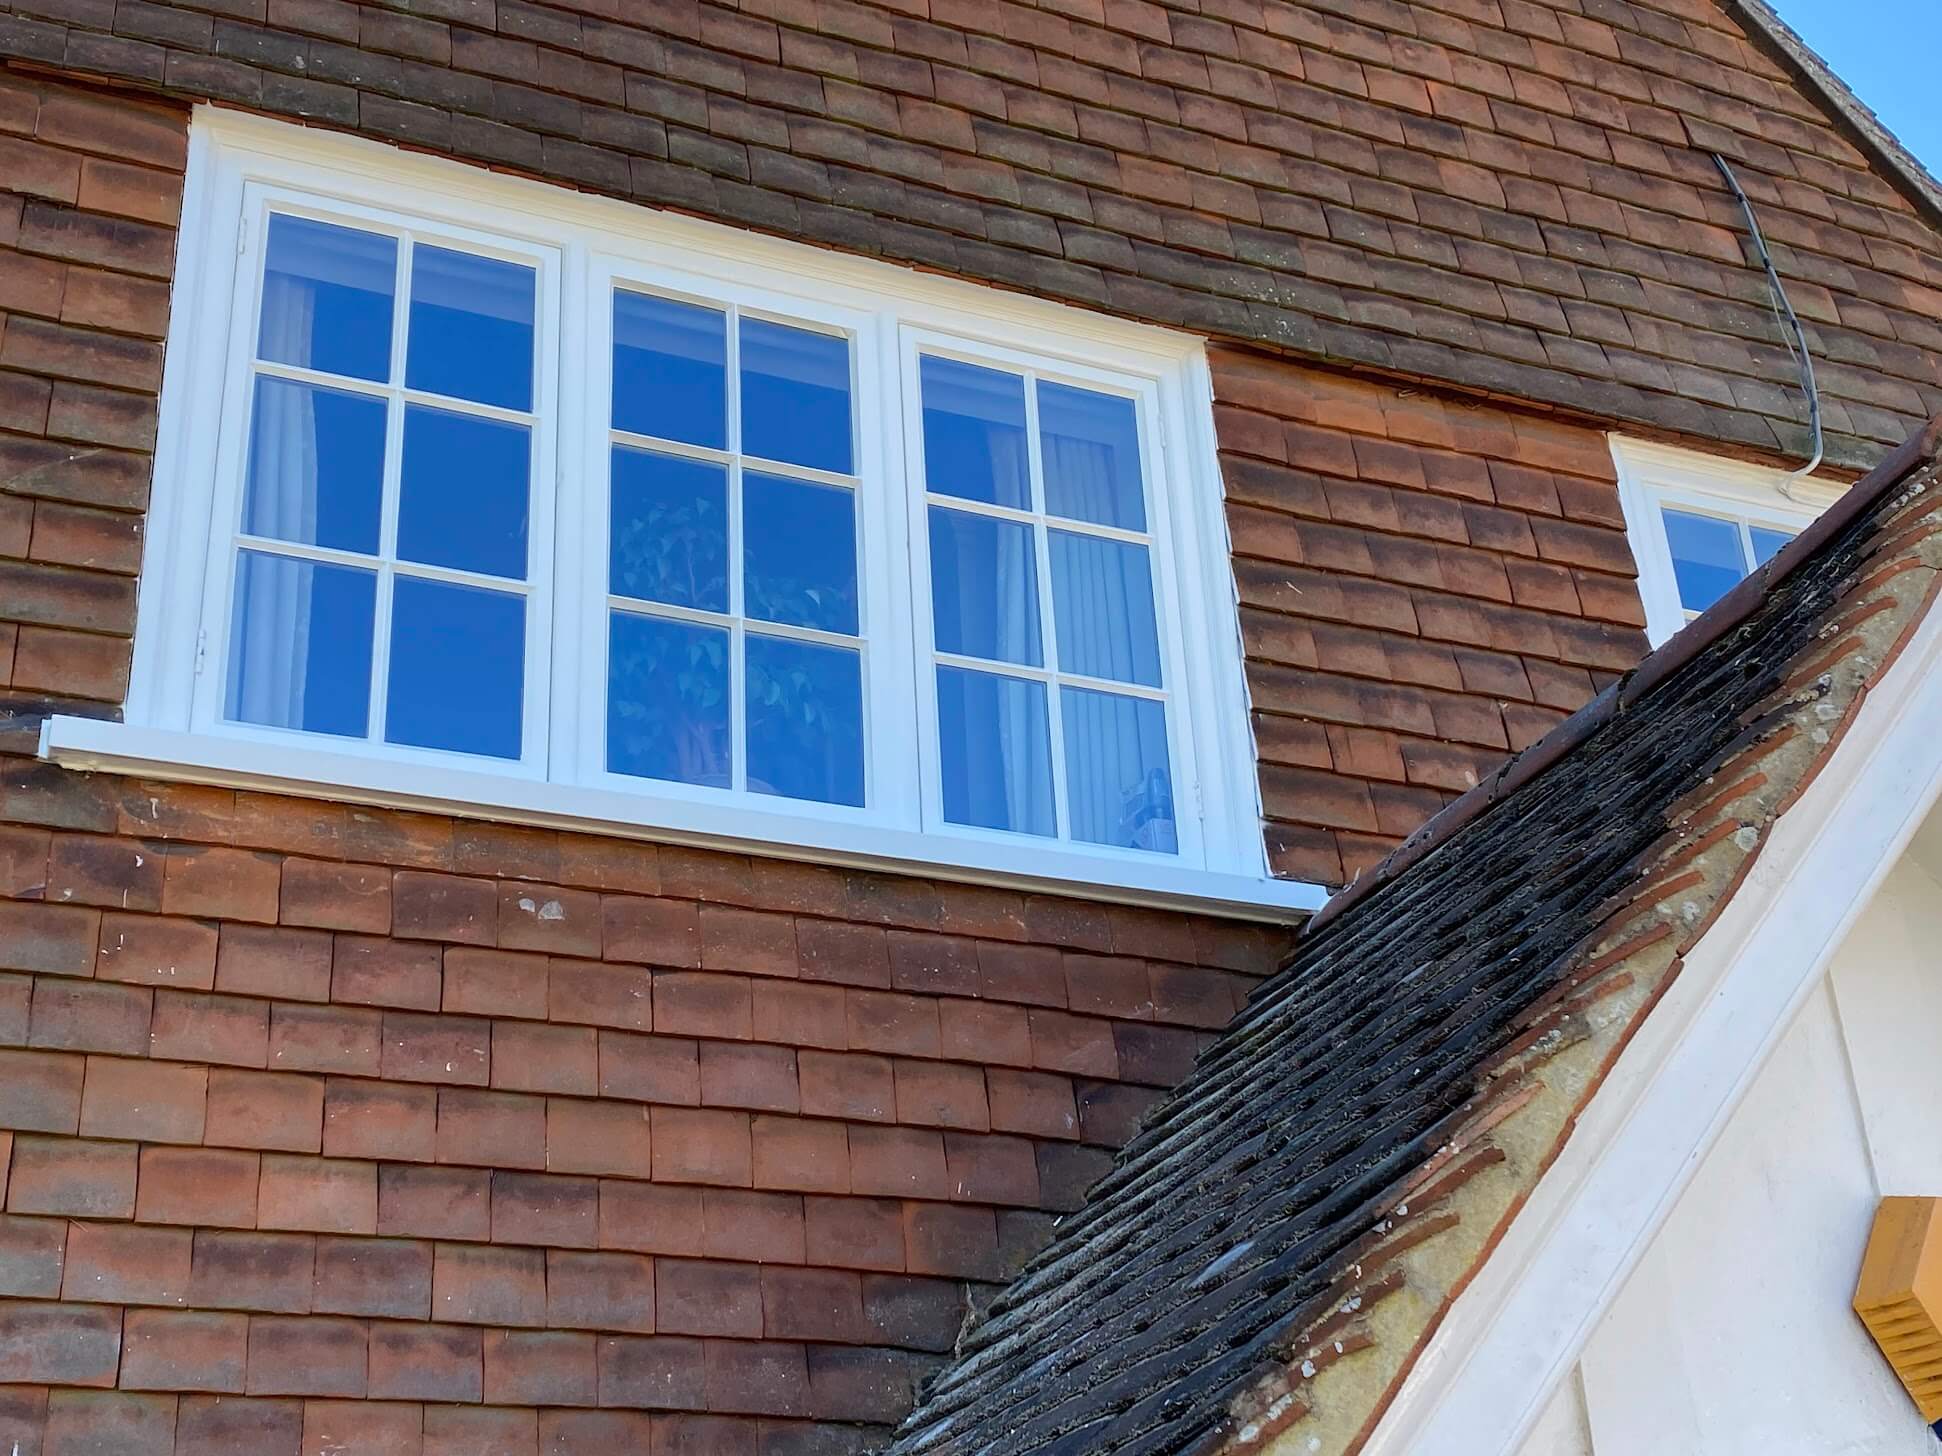 How to transform your old windows into energy-efficient windows